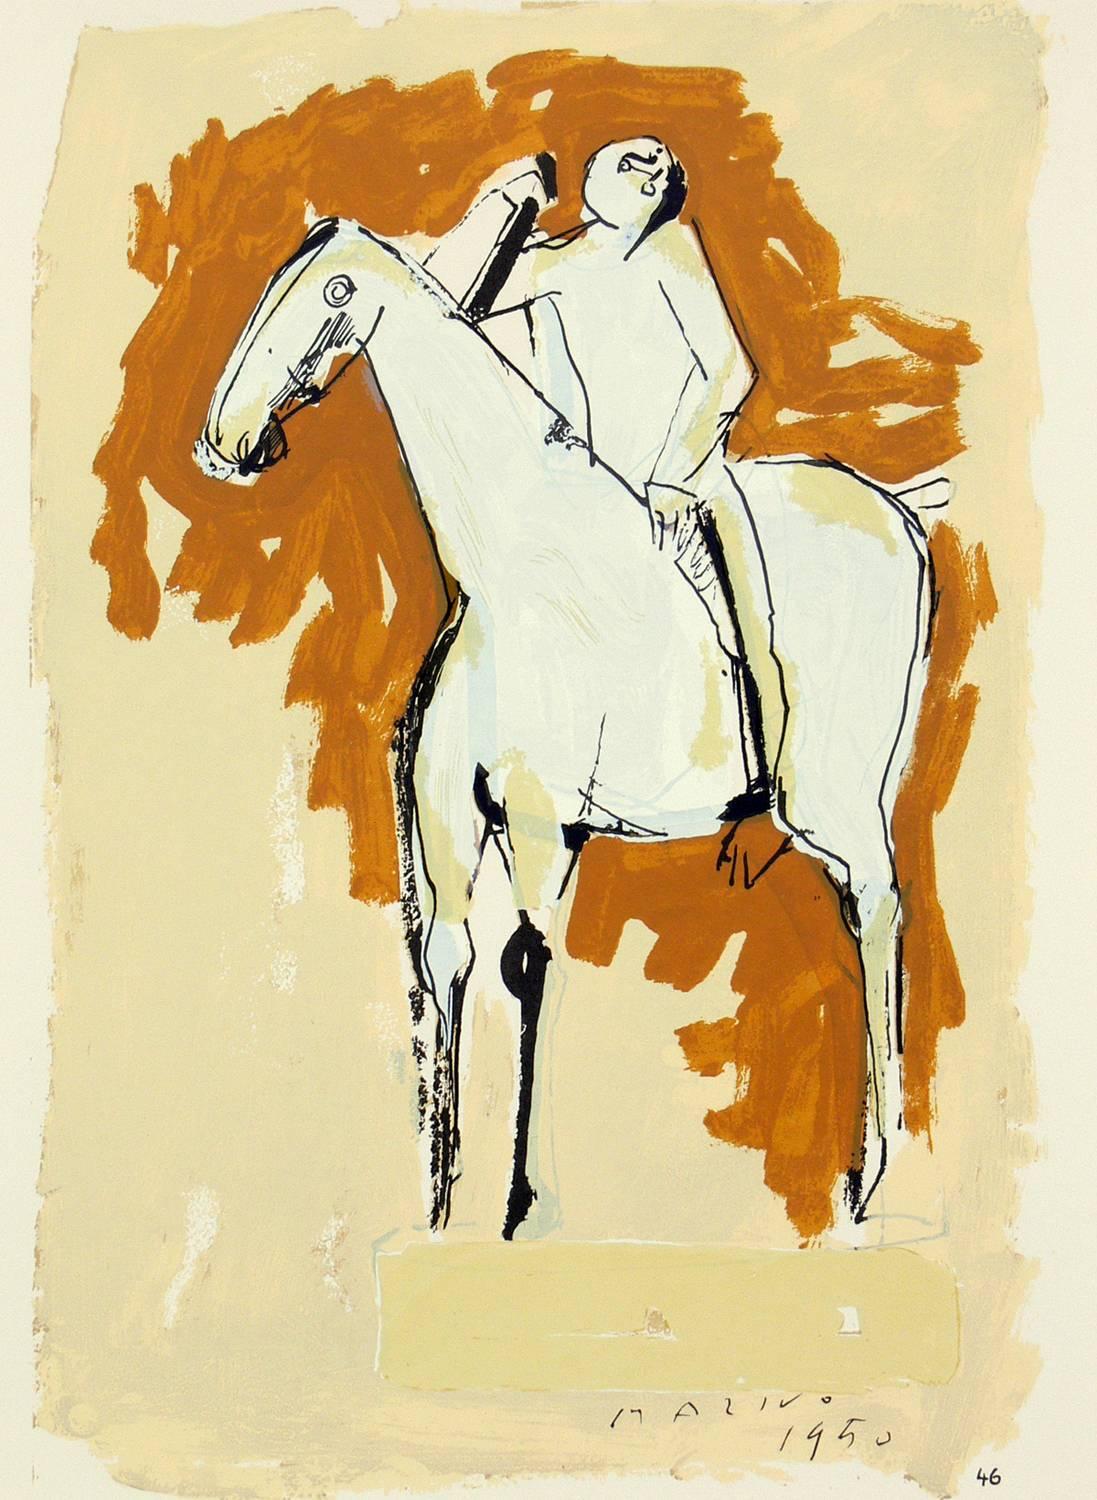 Pair of horse and rider lithographs by Marino Marini, from the Marino Marini portfolio, printed by Carl Schunemann, Germany, circa 1968. They have been framed in clean lined black lacquer gallery frames.